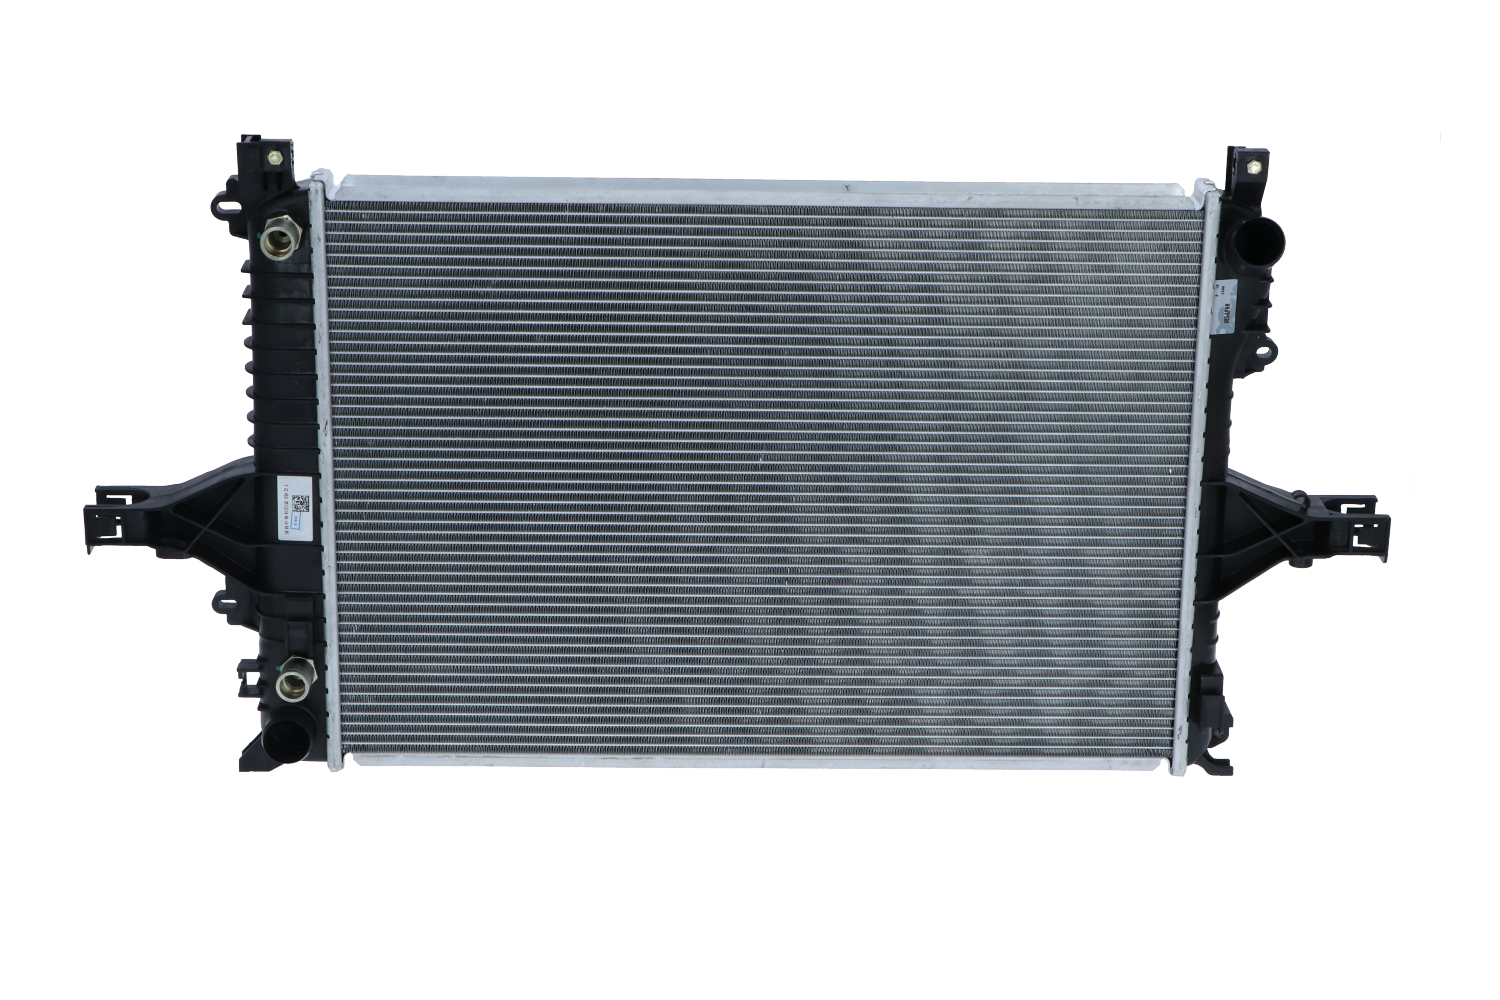 NRF 53532 Engine radiator Aluminium, 620 x 445 x 41 mm, with mounting parts, Brazed cooling fins